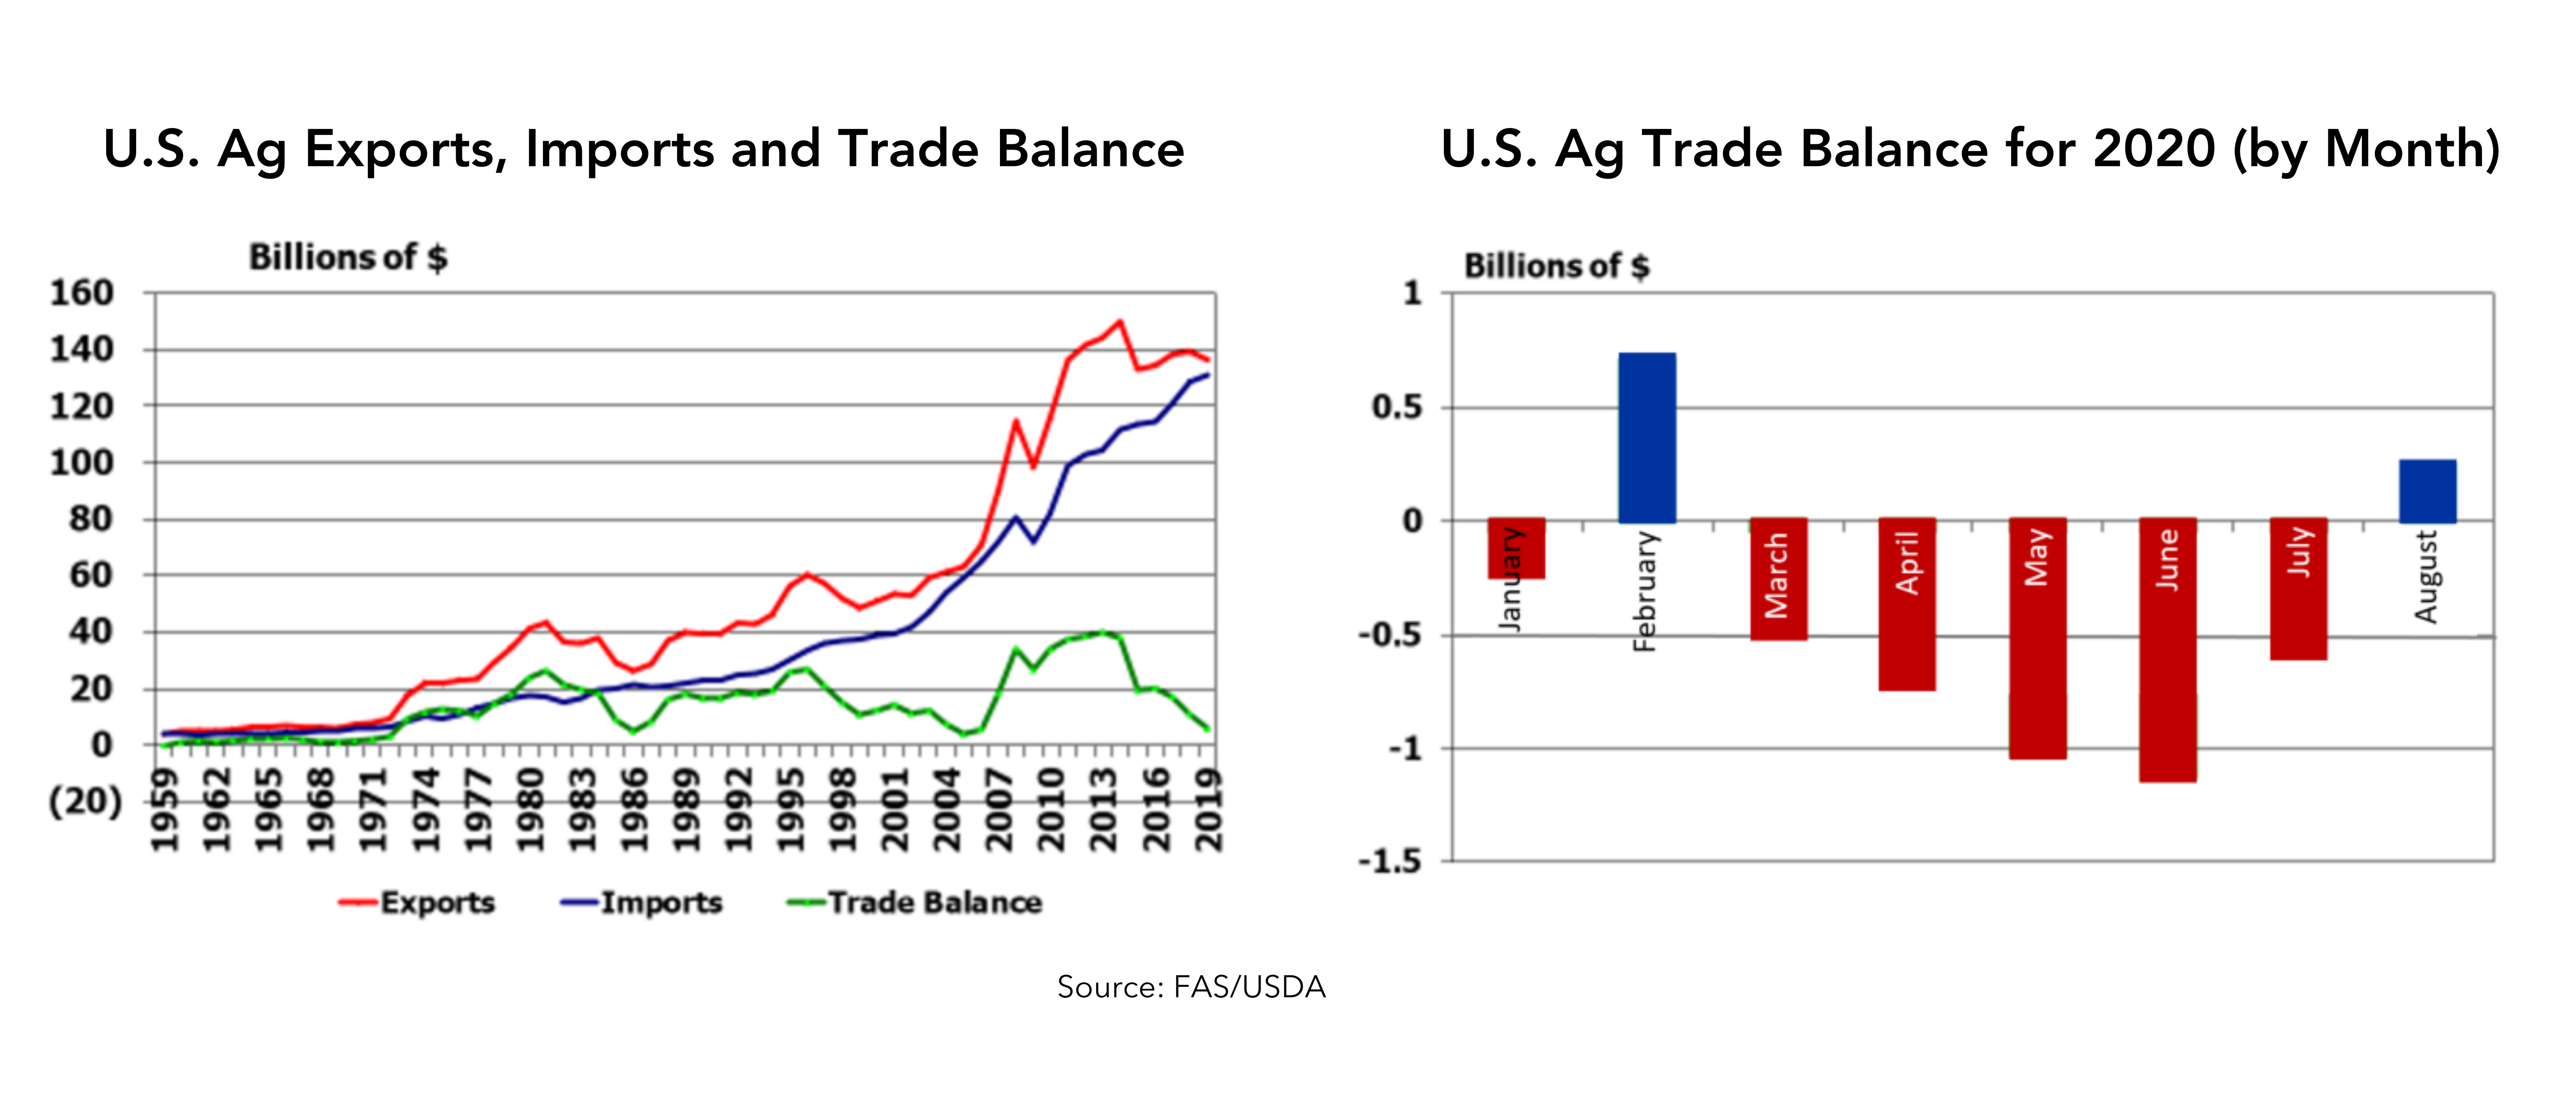 Graphs of U.S. Ag Exports, Imports and Trade Balance from 1959 through 2019 showing a recent decline in trade balance and of U.S. Ag Trade Balance for 2020 (by Month) showing trade deficits in all but 2 months